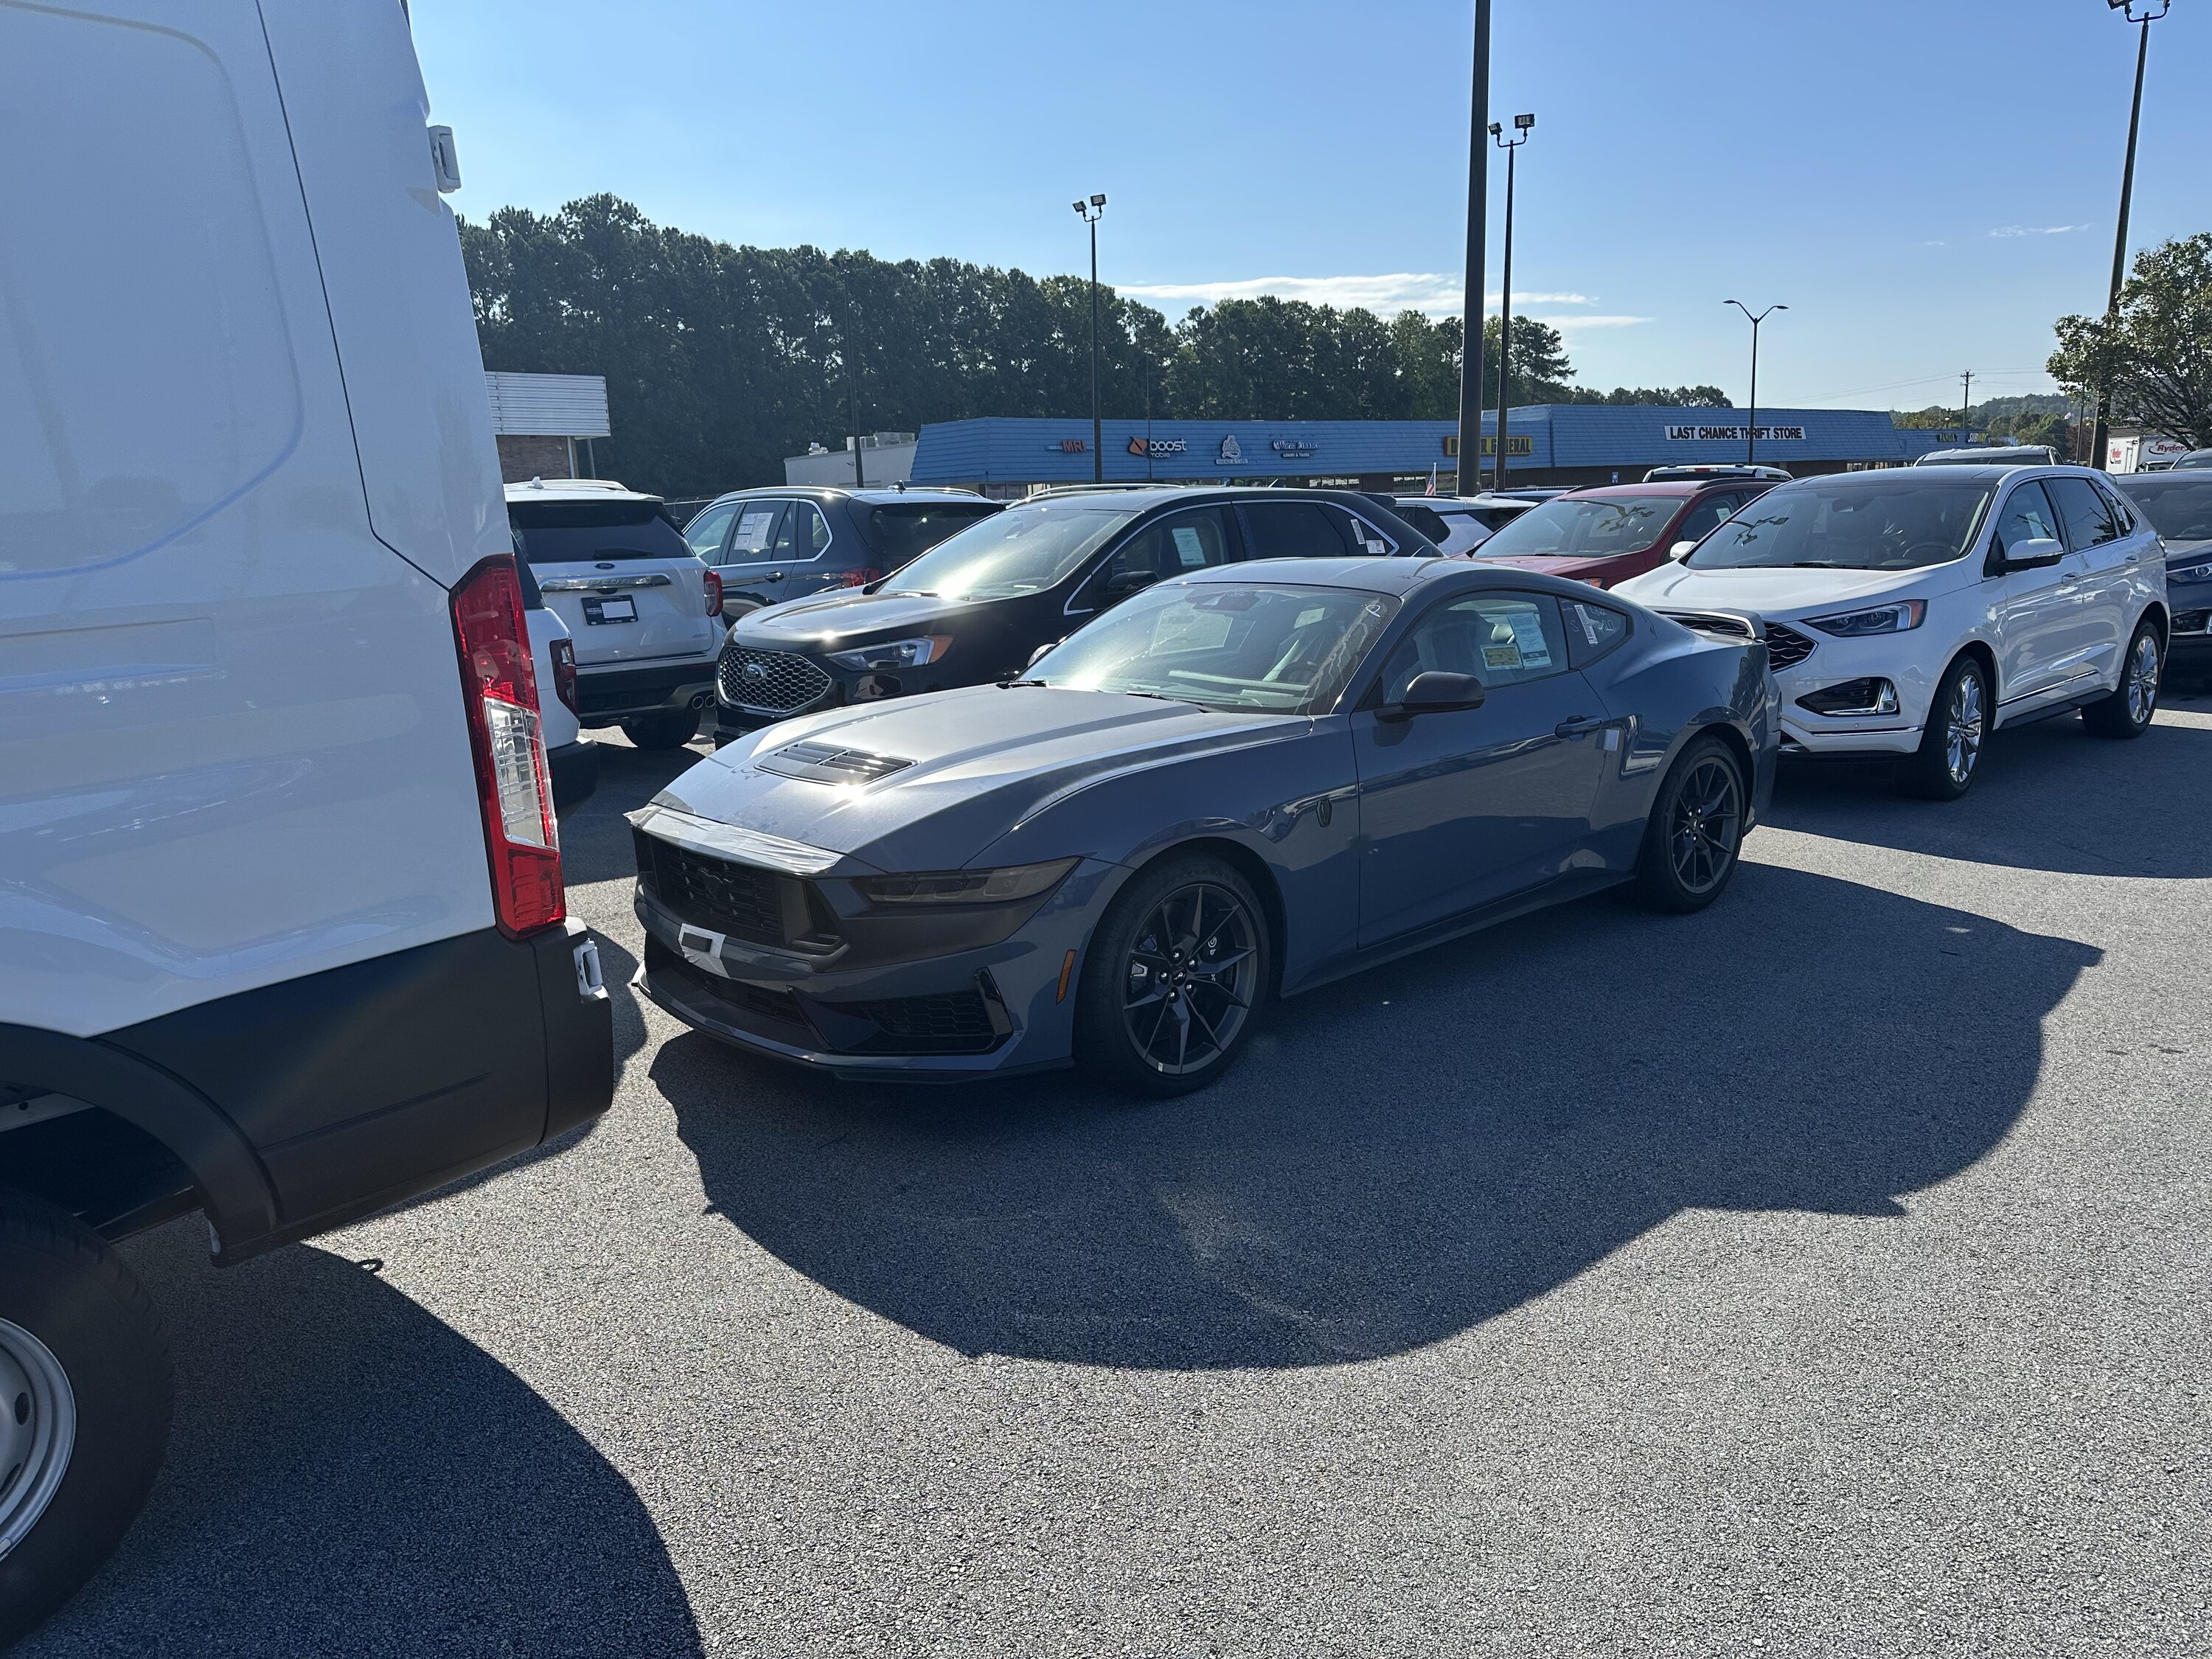 S650 Mustang BUILT & SHIPPED !! Tracker update 2023: What's your status? tempImagerQhBls